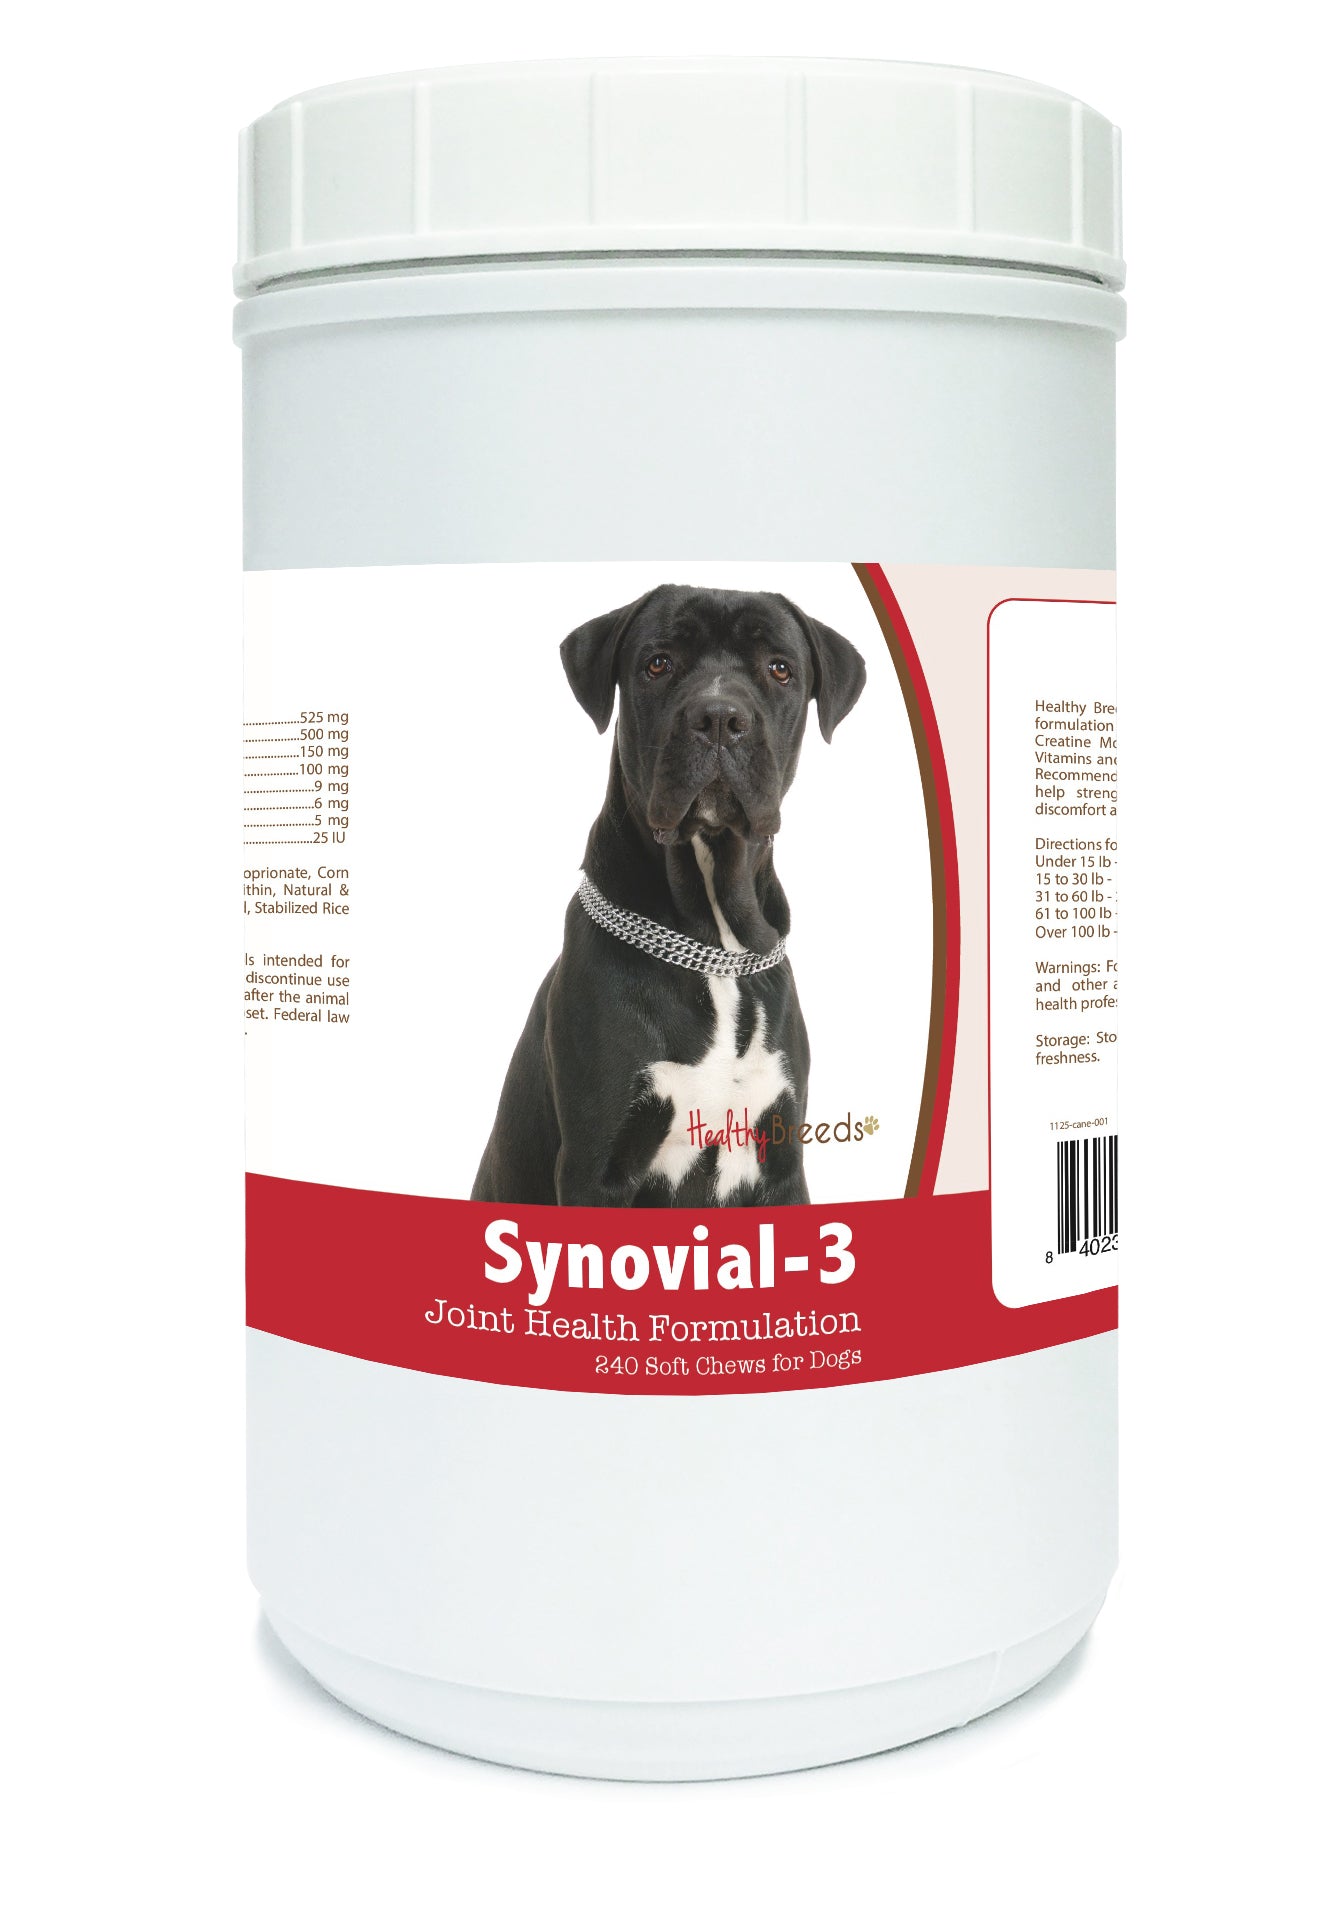 Cane Corso Synovial-3 Joint Health Formulation Soft Chews 240 Count